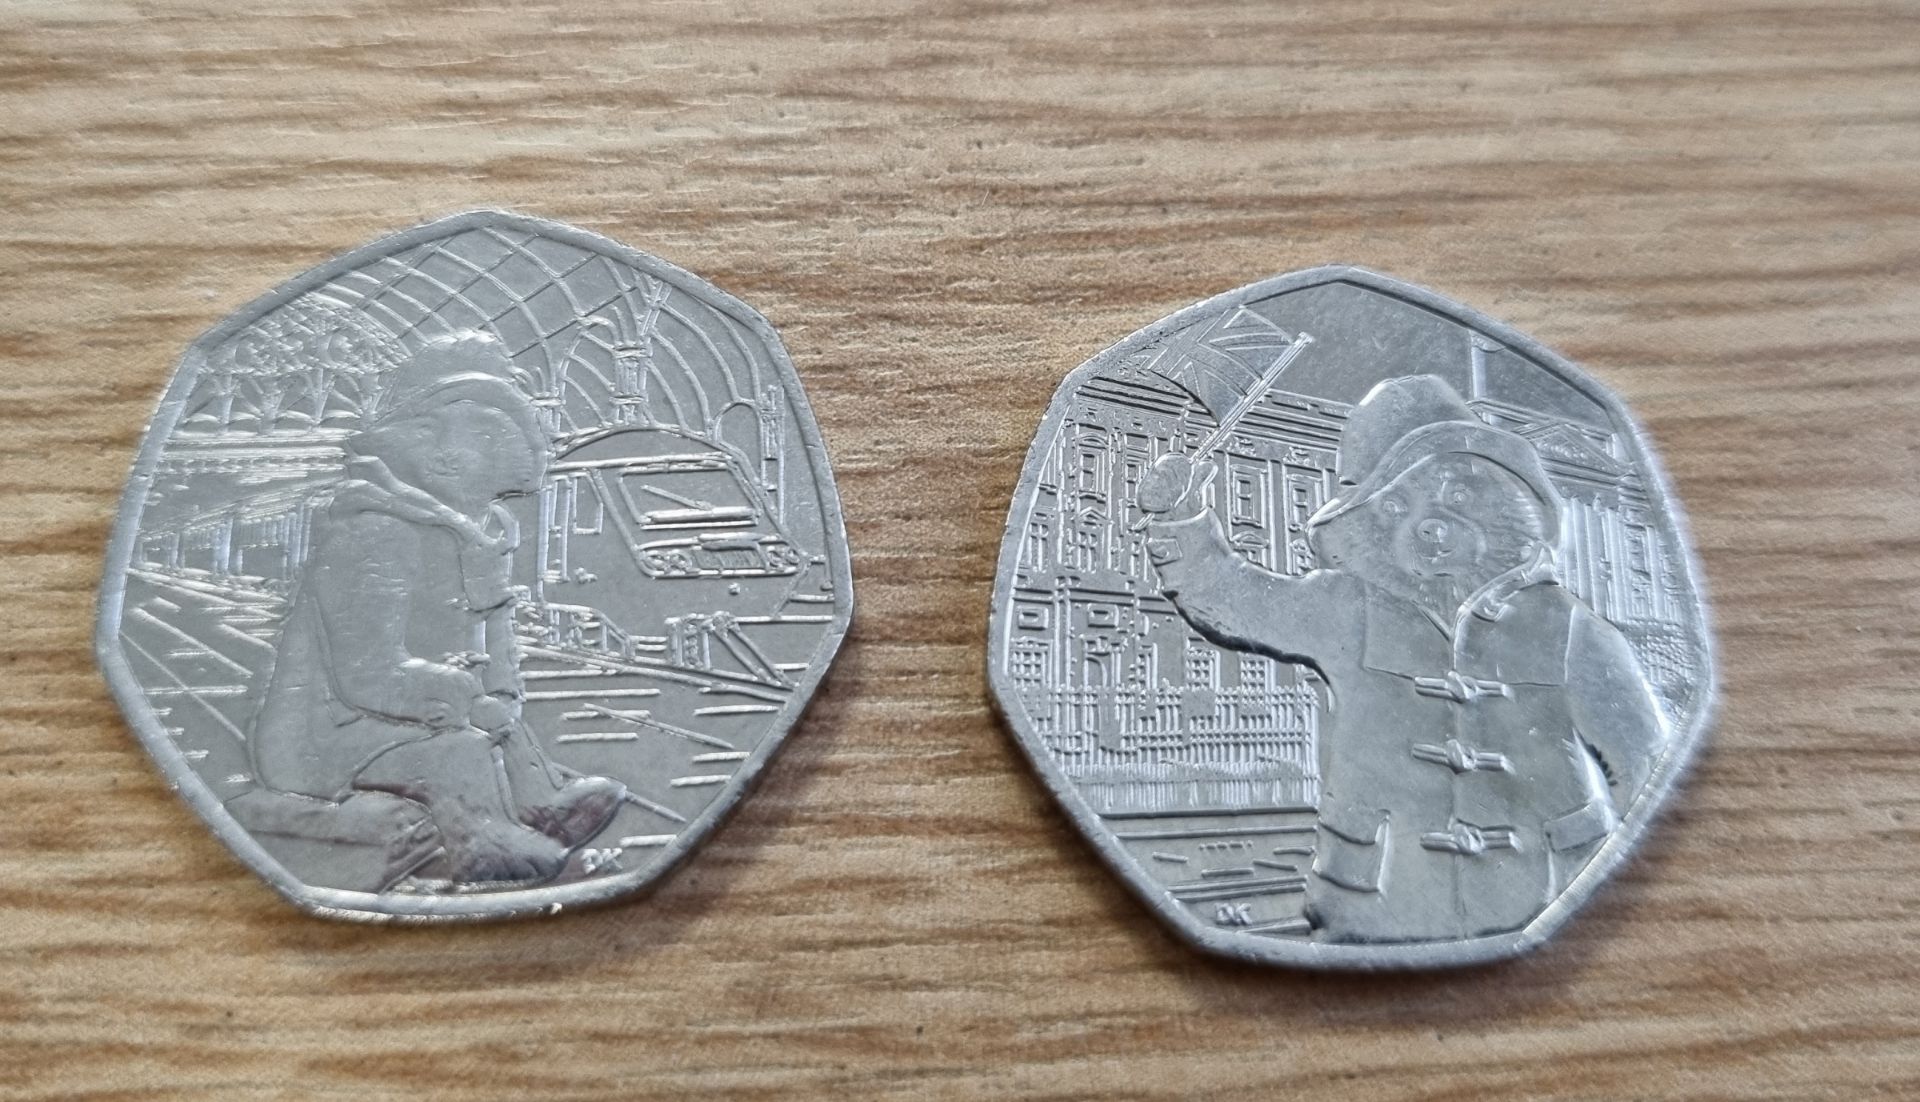 Collection of collectable Paddington Bear 50p coins - Full set of 4 coins - Image 4 of 4